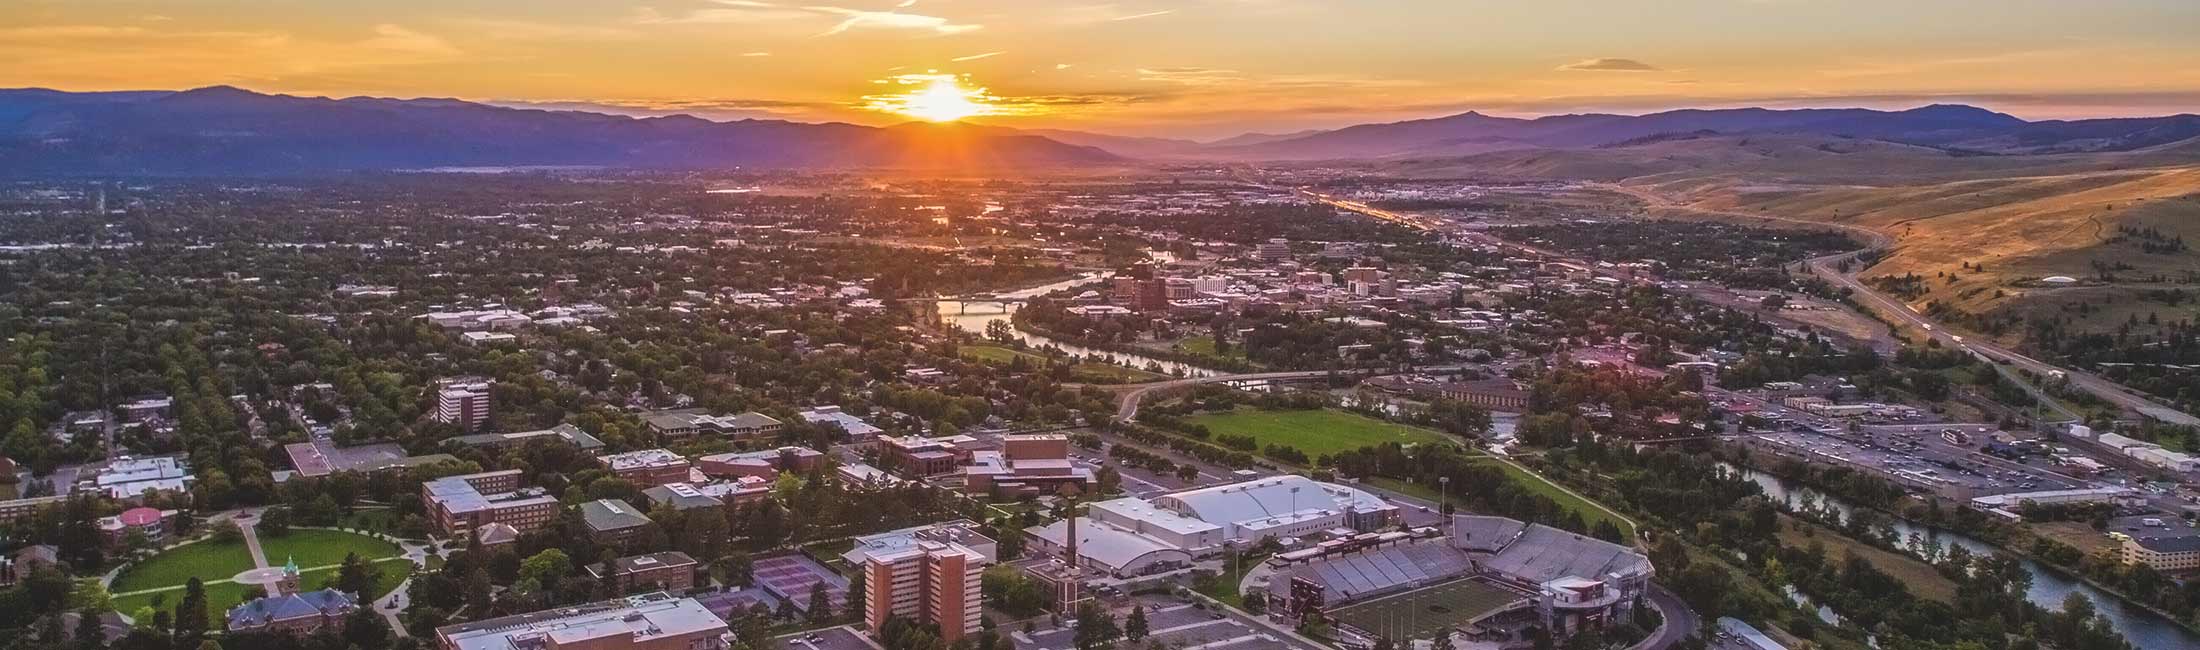 20 Things We Love About Missoula